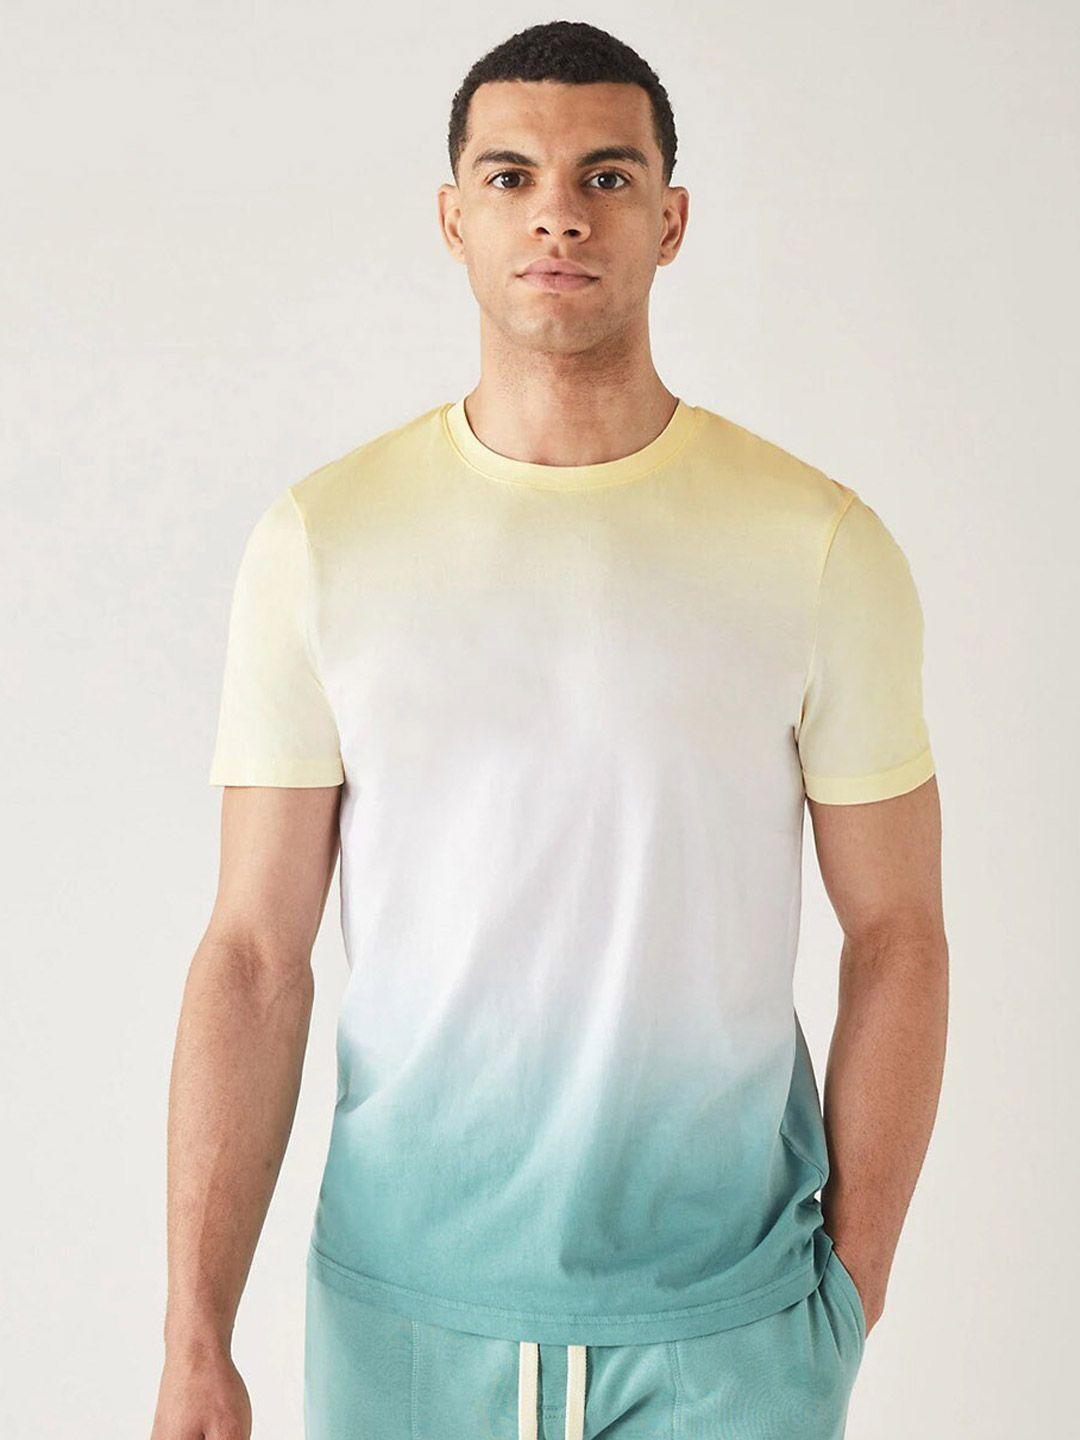 marks-&-spencer-tie-and-dye-t-shirt